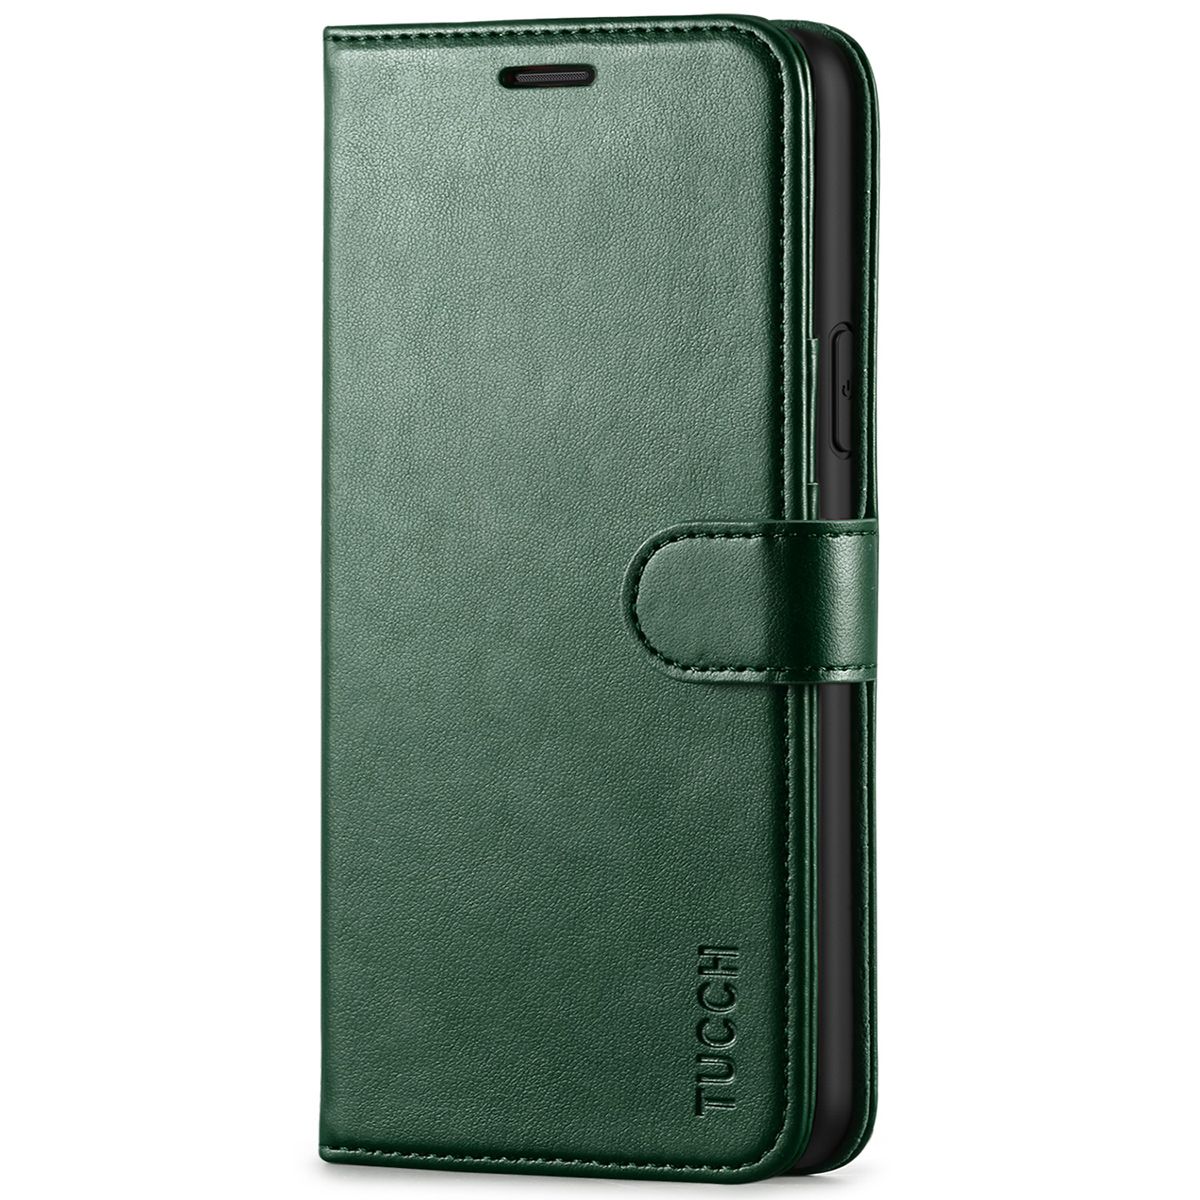 PU Leather Flip Cover Compatible with iPhone 11 Green Wallet Case for iPhone 11 